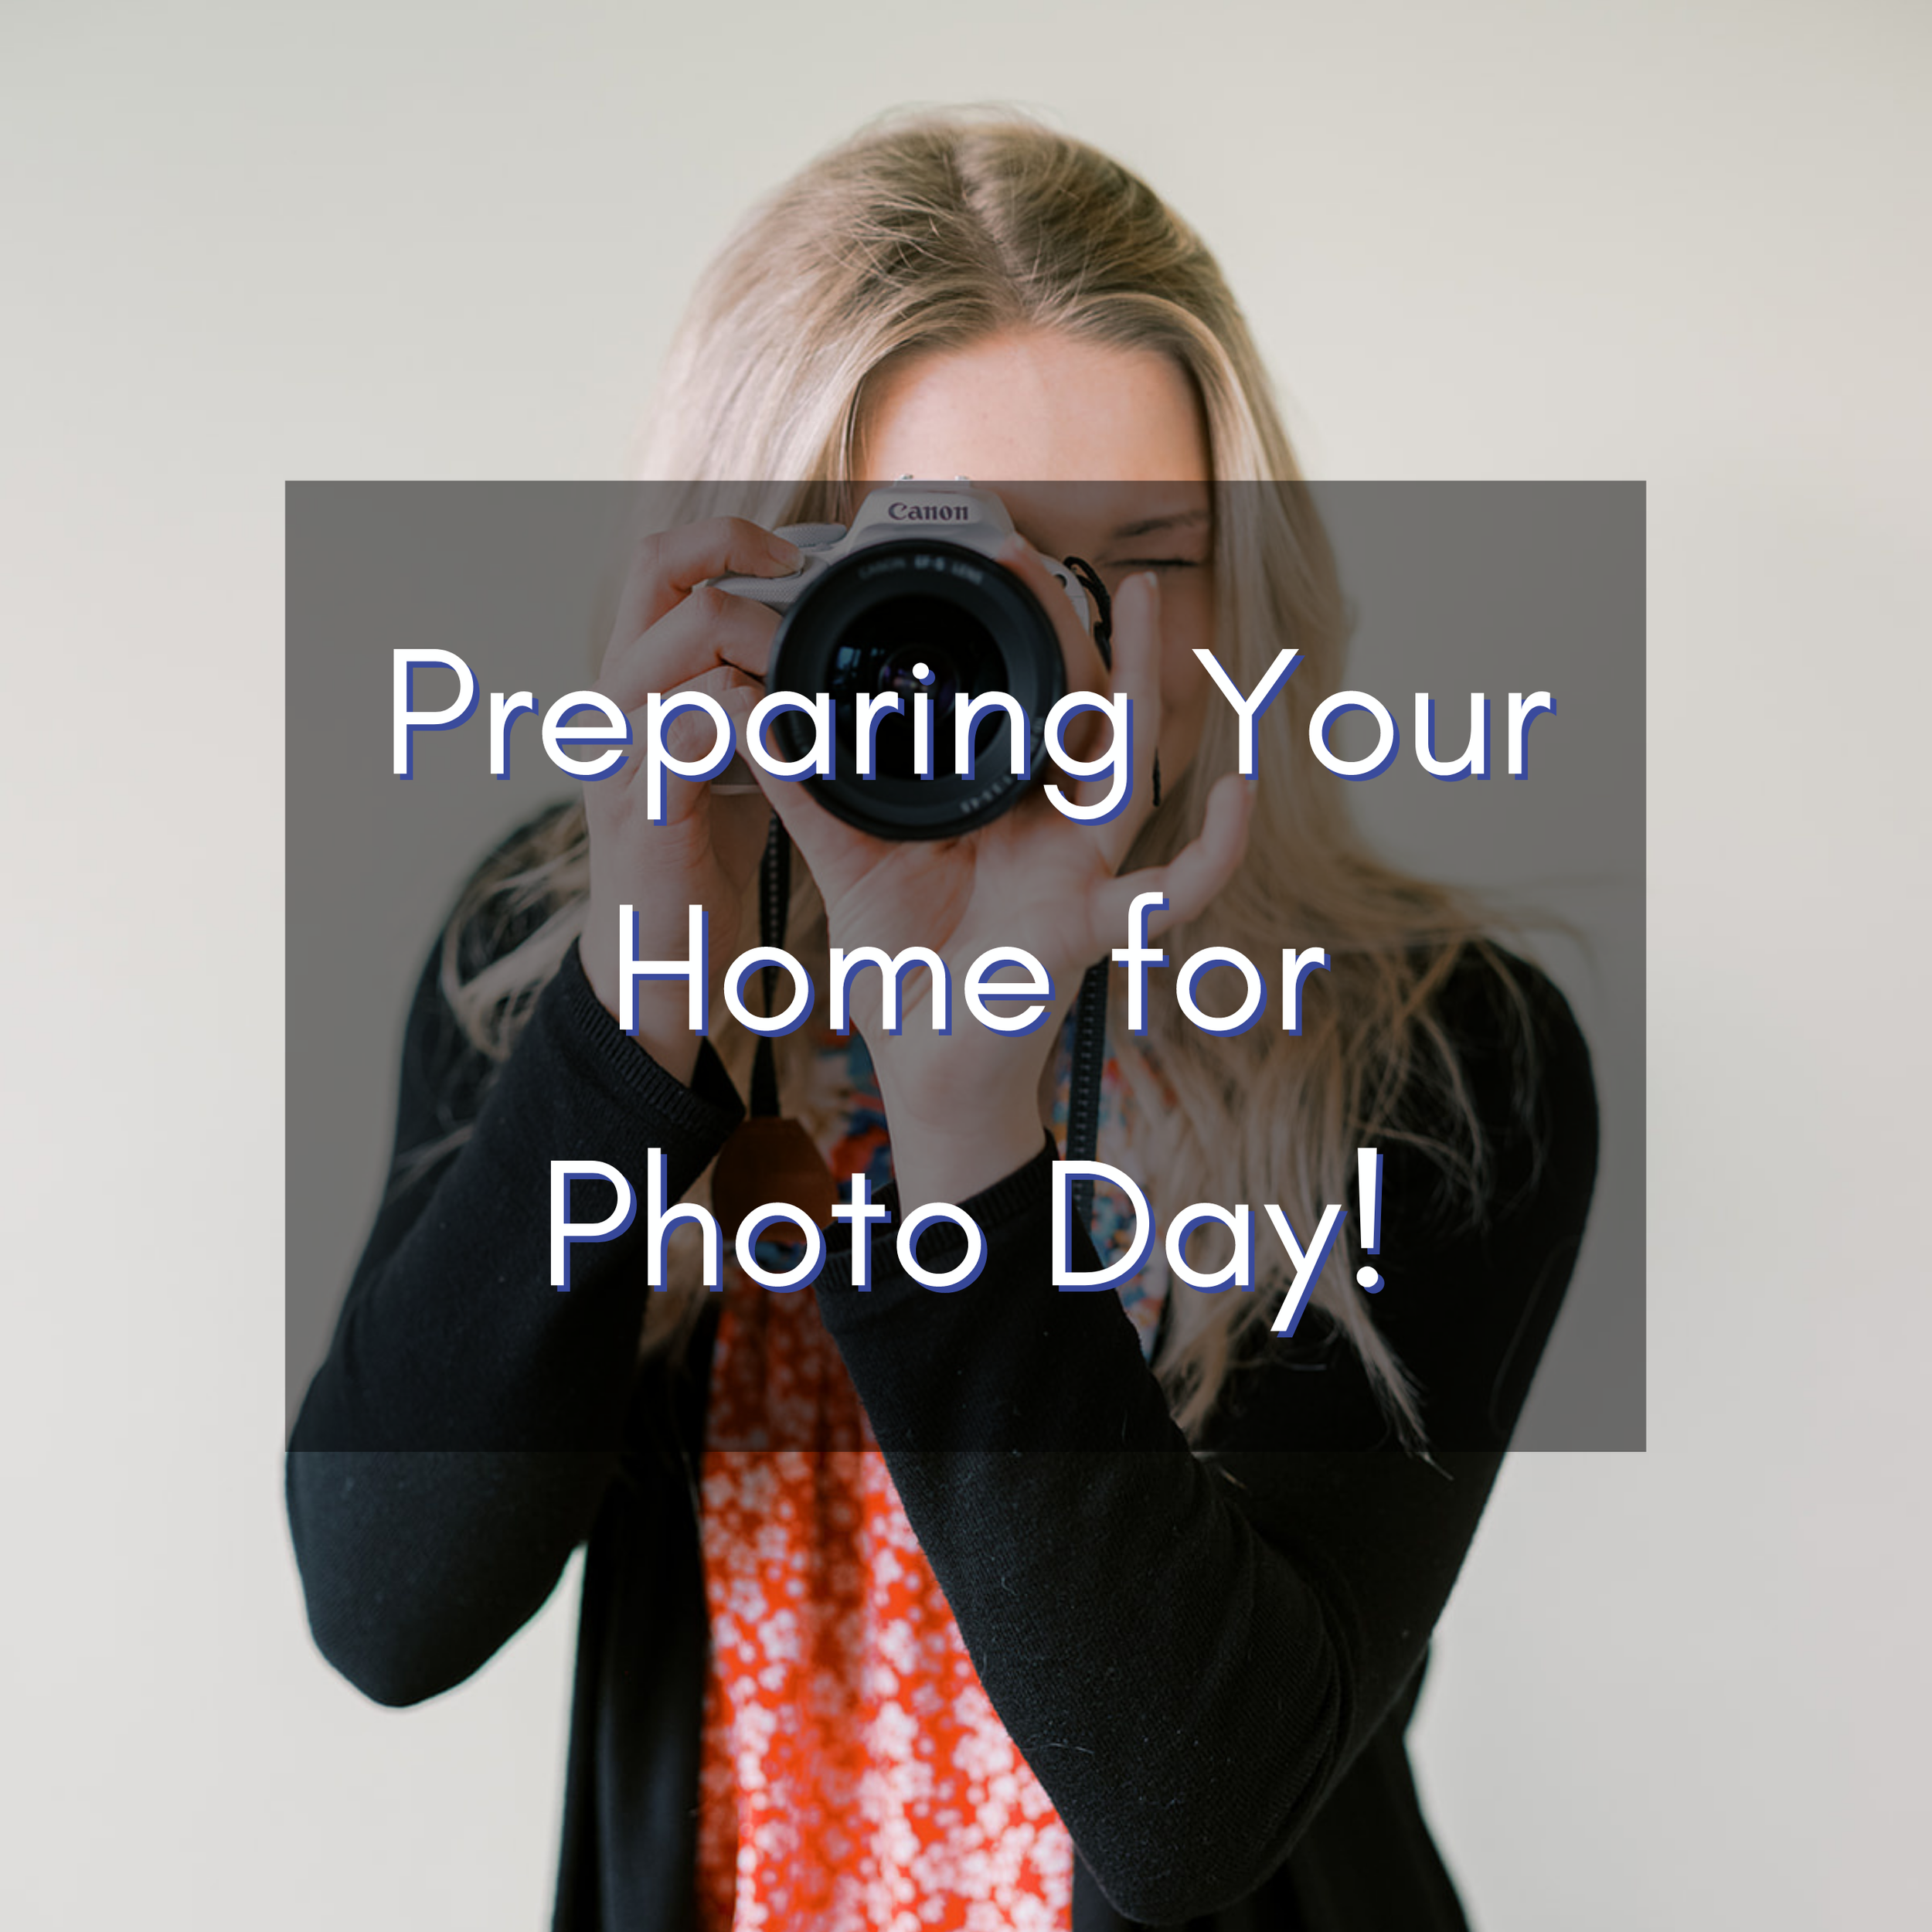 Preparing Your Home for Photo Day!